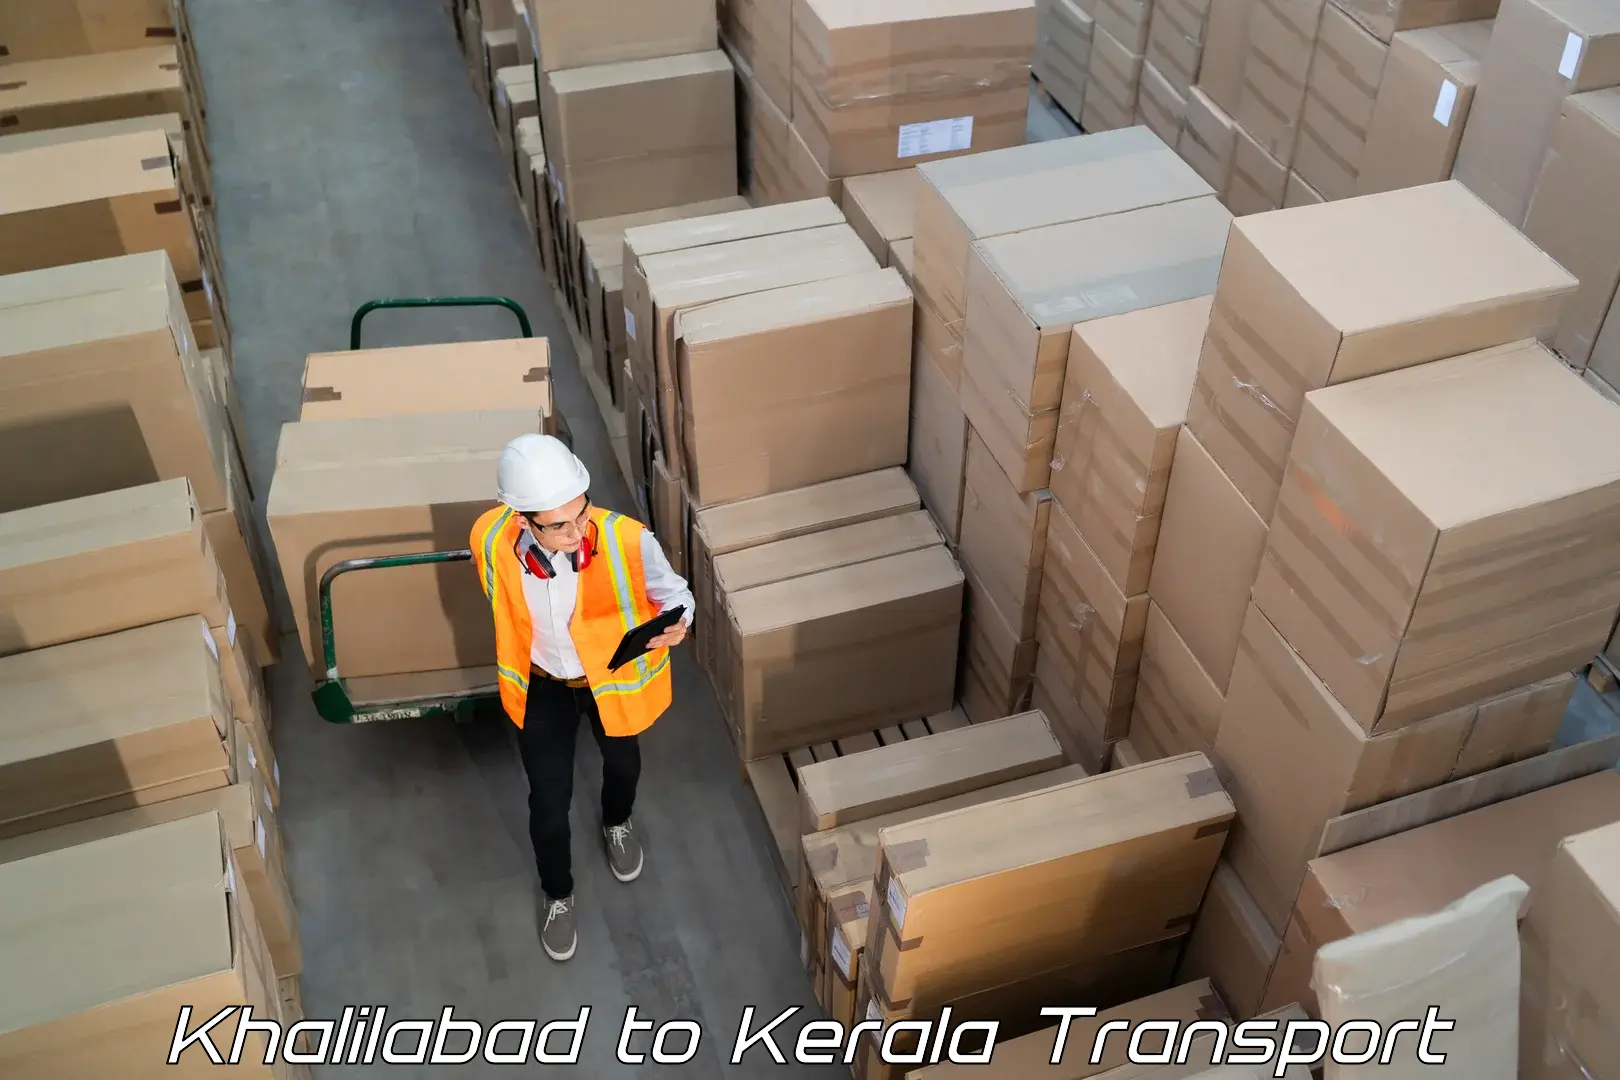 Vehicle transport services in Khalilabad to Kerala